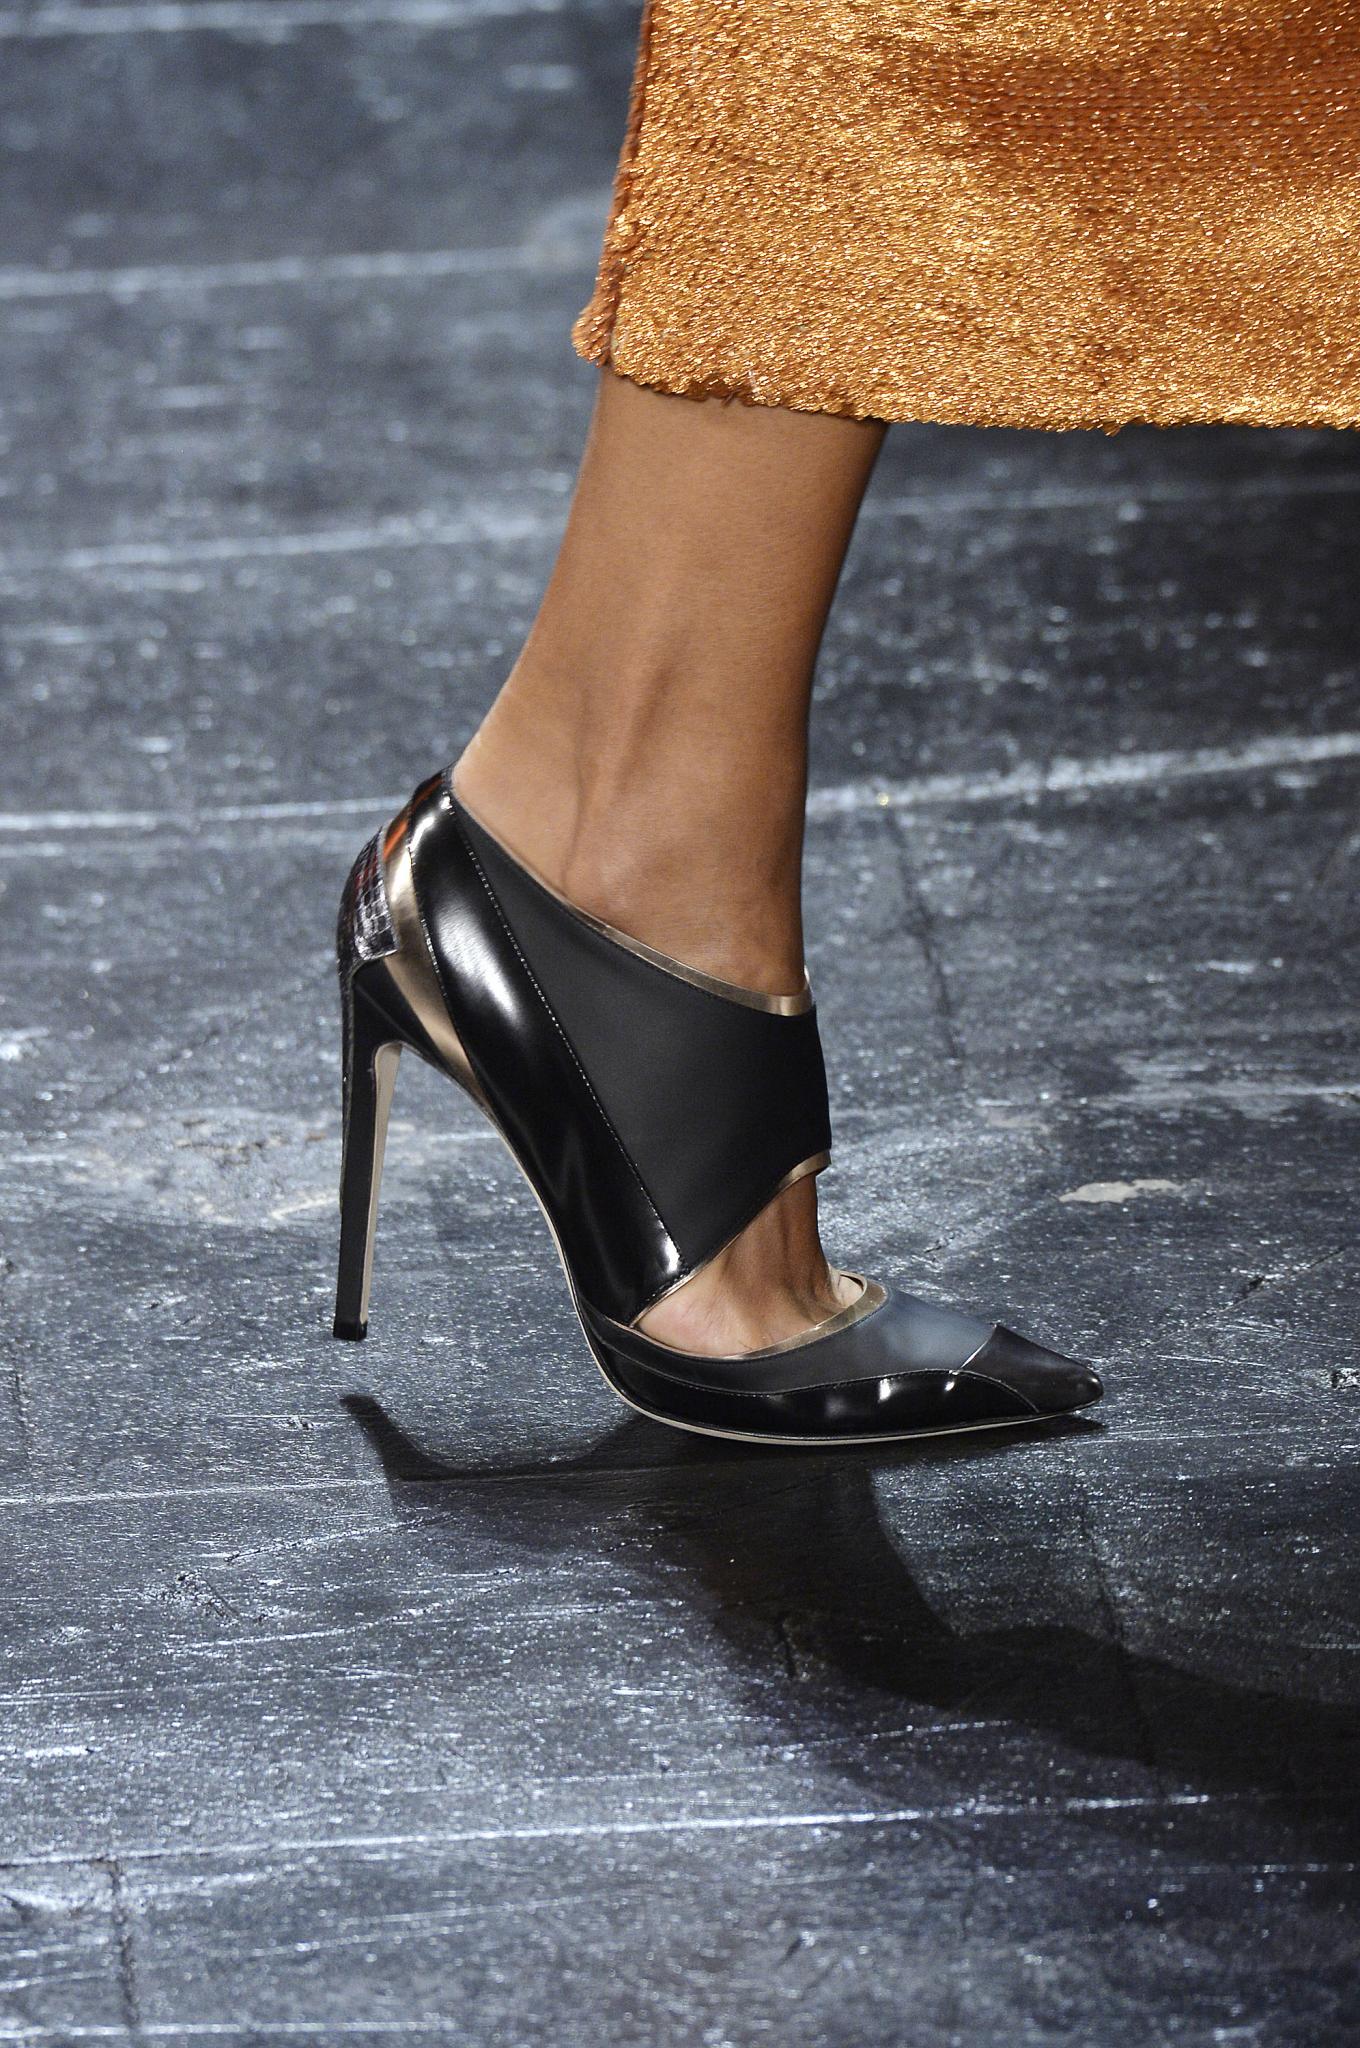 Started From The Bottom: The Ultimate Runway Shoes | Essence